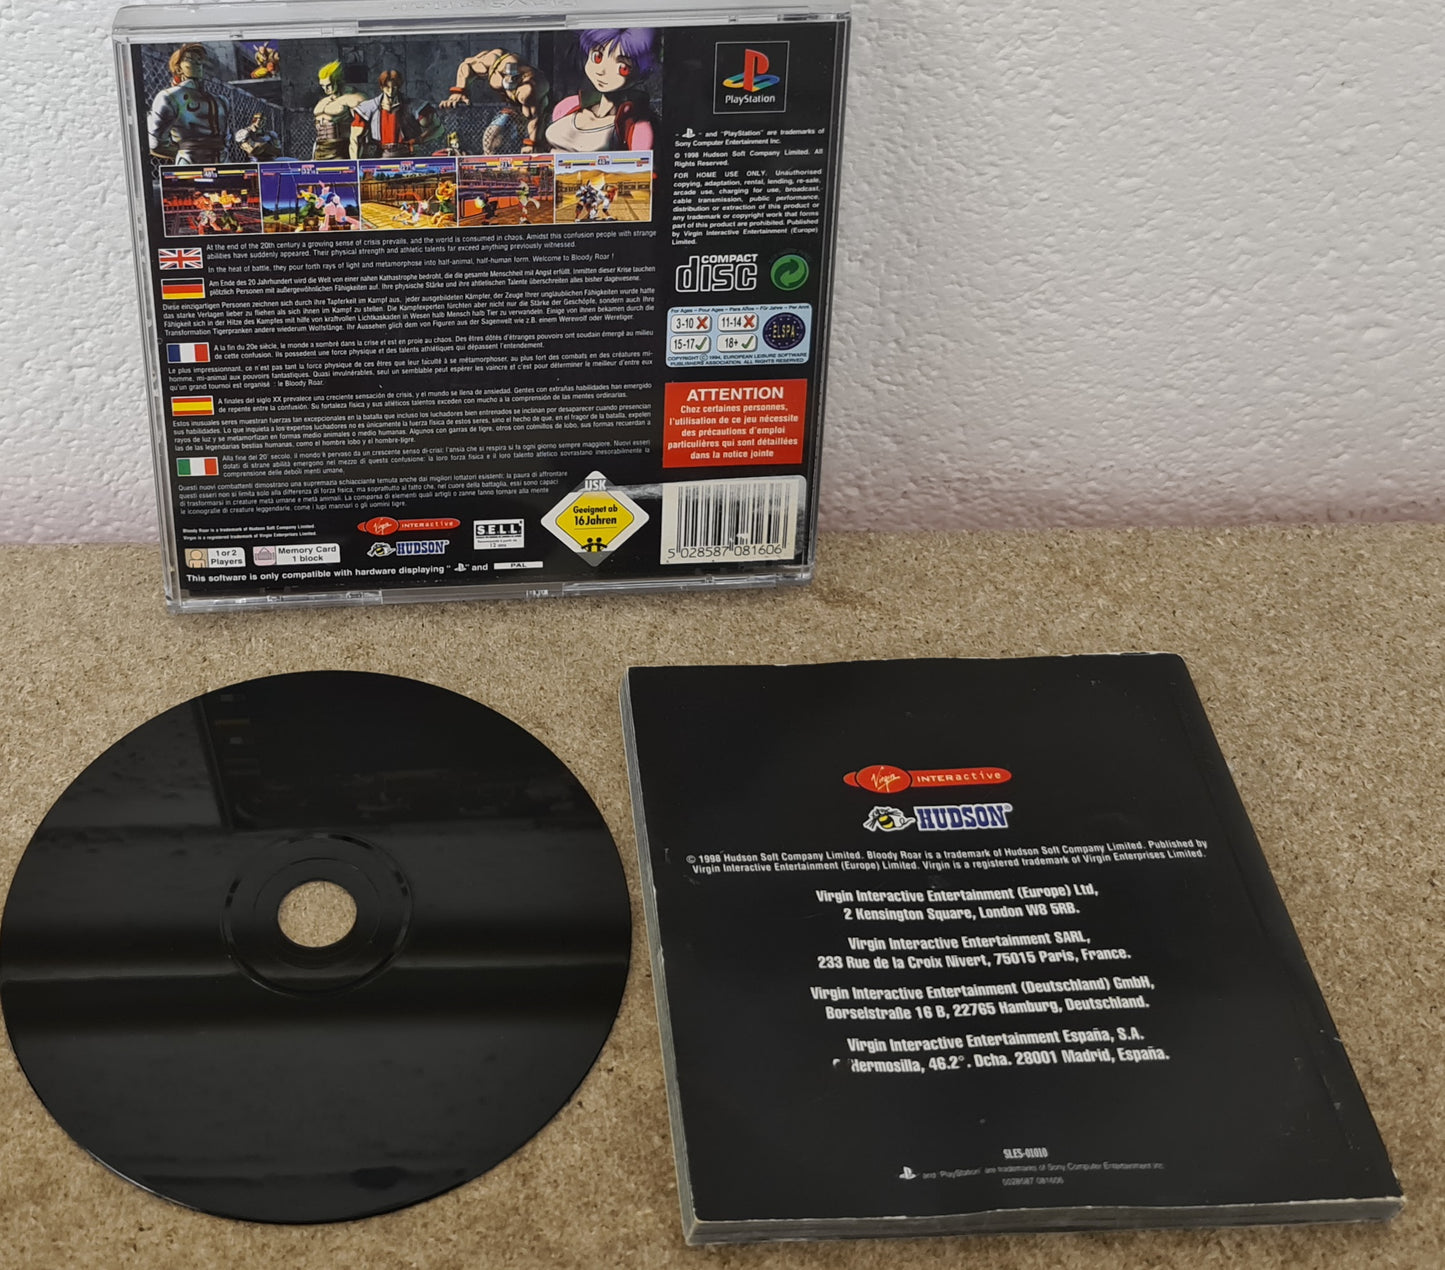 Bloody Roar Sony Playstation 1 (PS1) Game